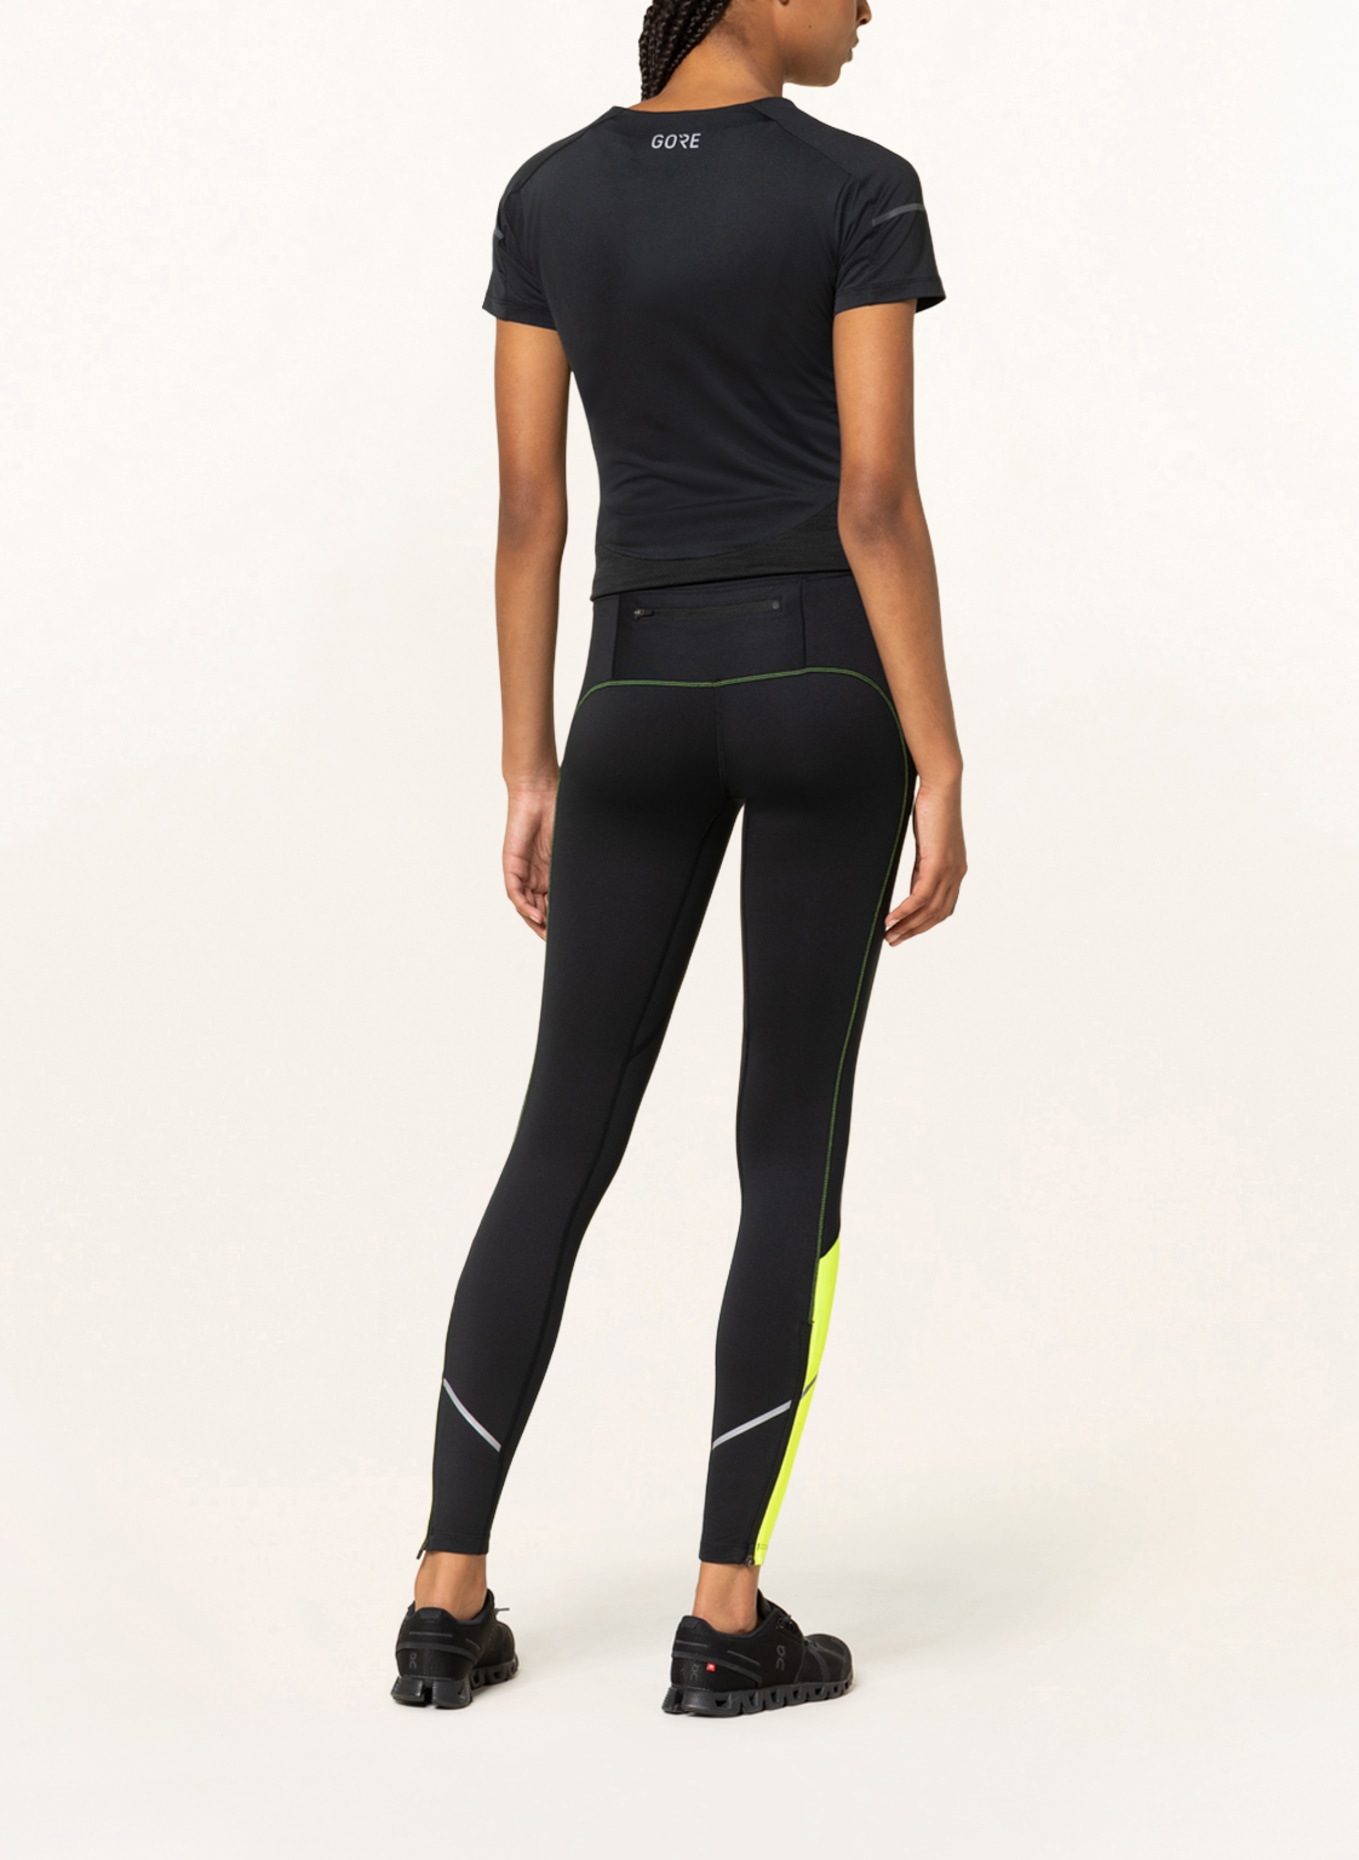 GORE RUNNING WEAR 7/8 tights R3, Color: BLACK/ NEON YELLOW (Image 3)